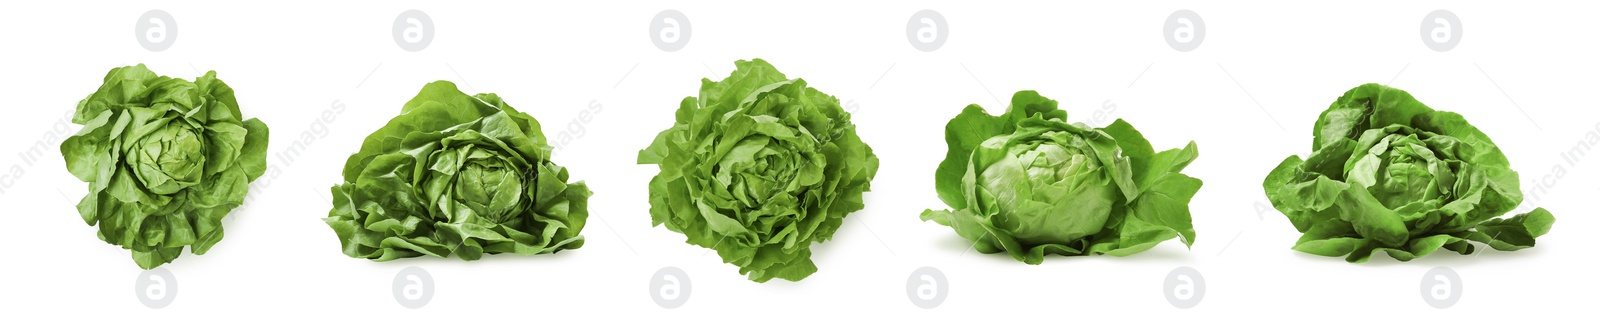 Image of Set of fresh butterhead lettuce on white background, different views